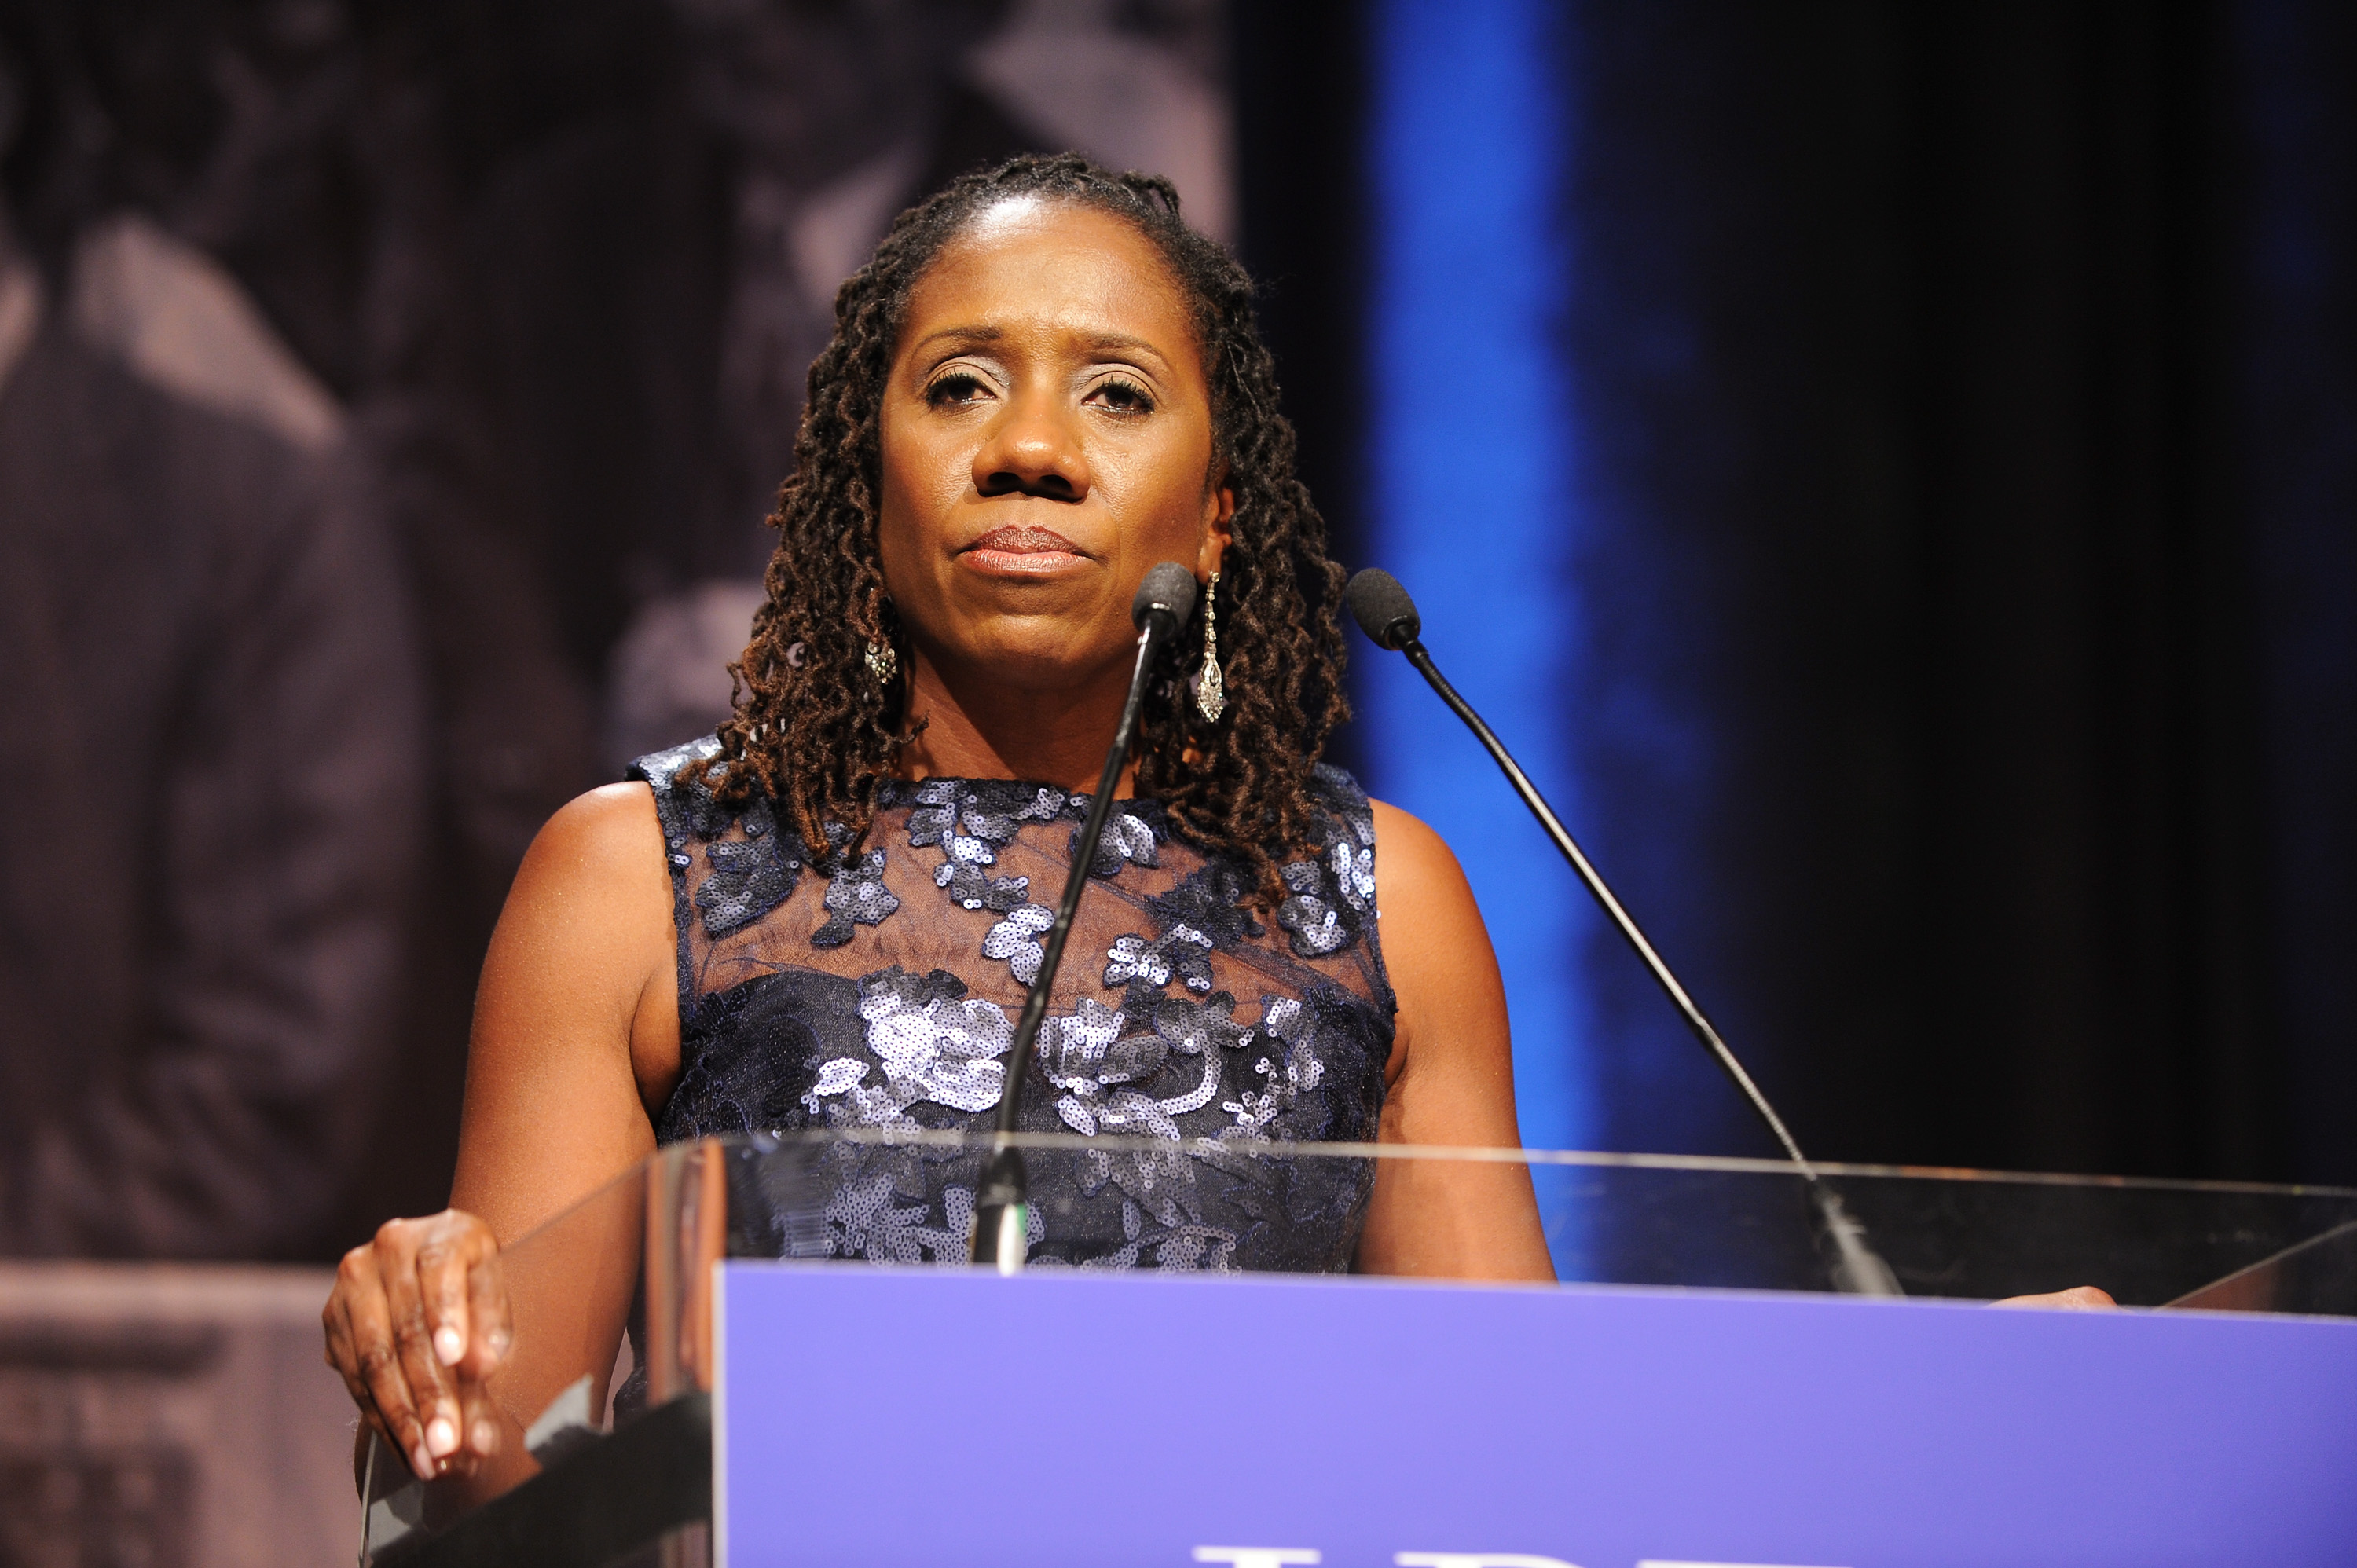 President and Director-Counsel of the LDF Sherrilyn Ifill speaks onstage during the Legal Defense Fund Annual Gala to commemorate the 60th anniversary of Brown V. Board of Education at the New York Hilton Midtown on November 6, 2014 in New York City. (Photo by Craig Barritt—Getty Images for NAACP Legal Defense Fund)